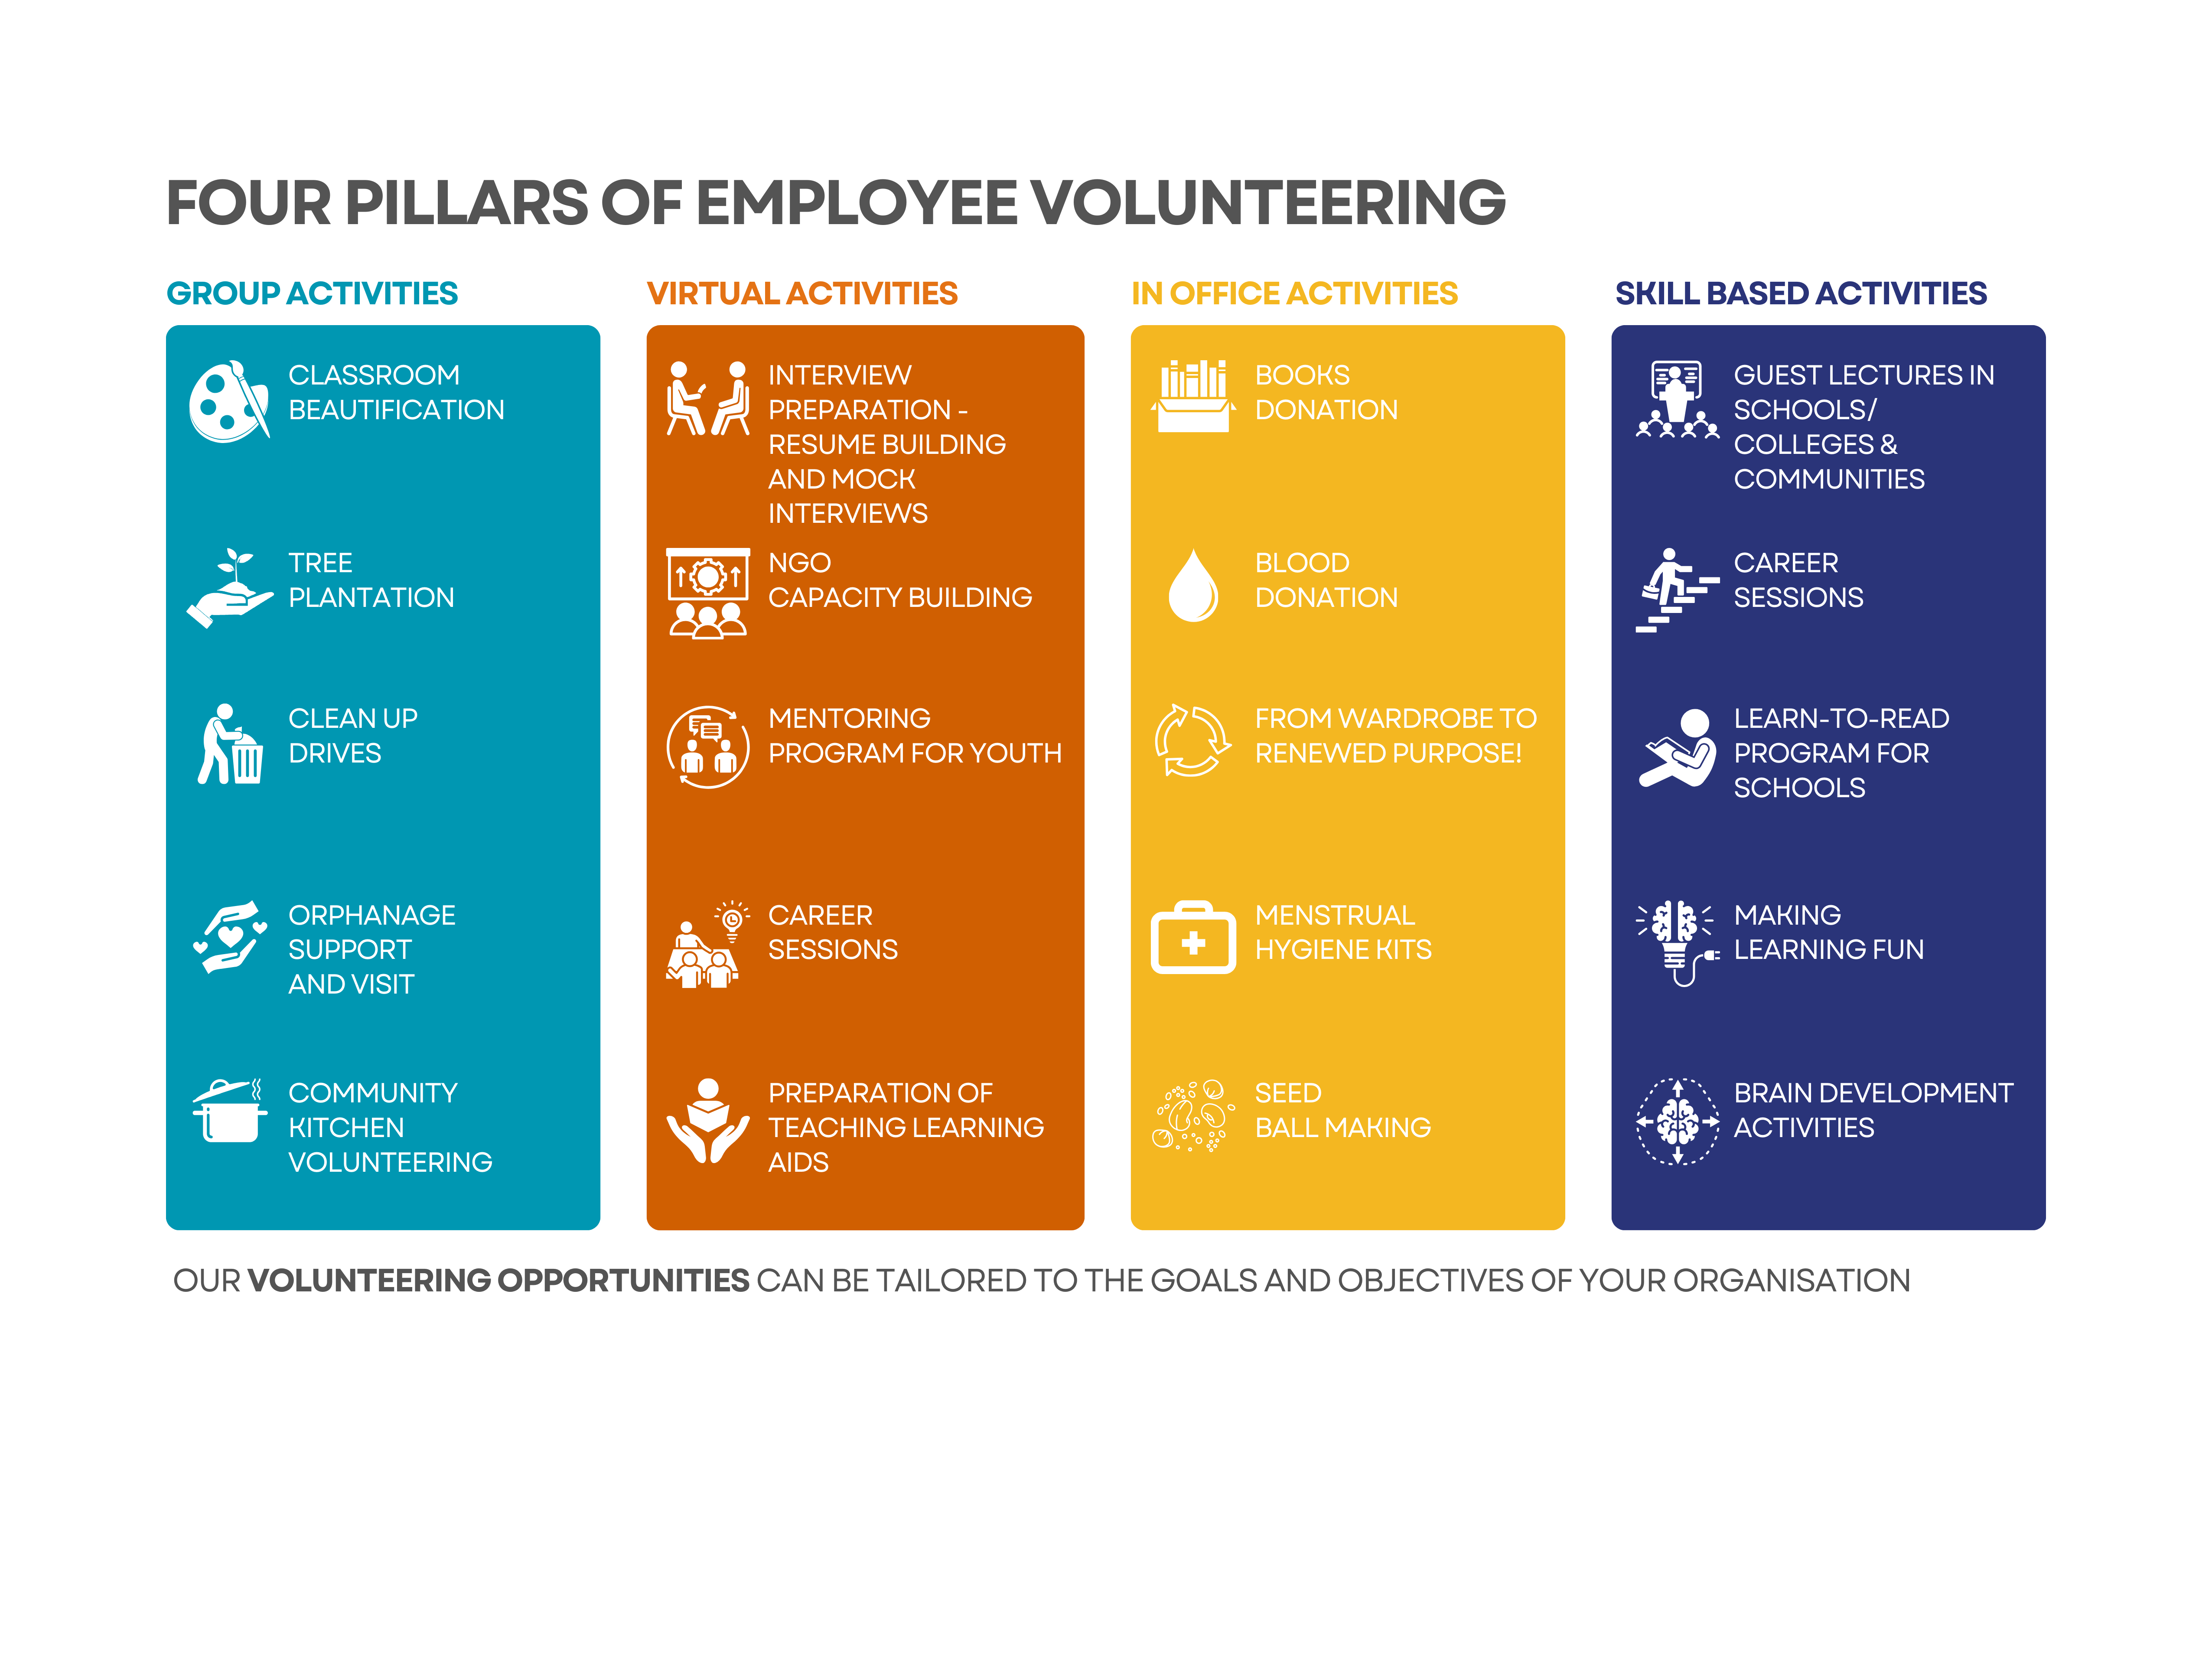 Our Employee Volunteering Services